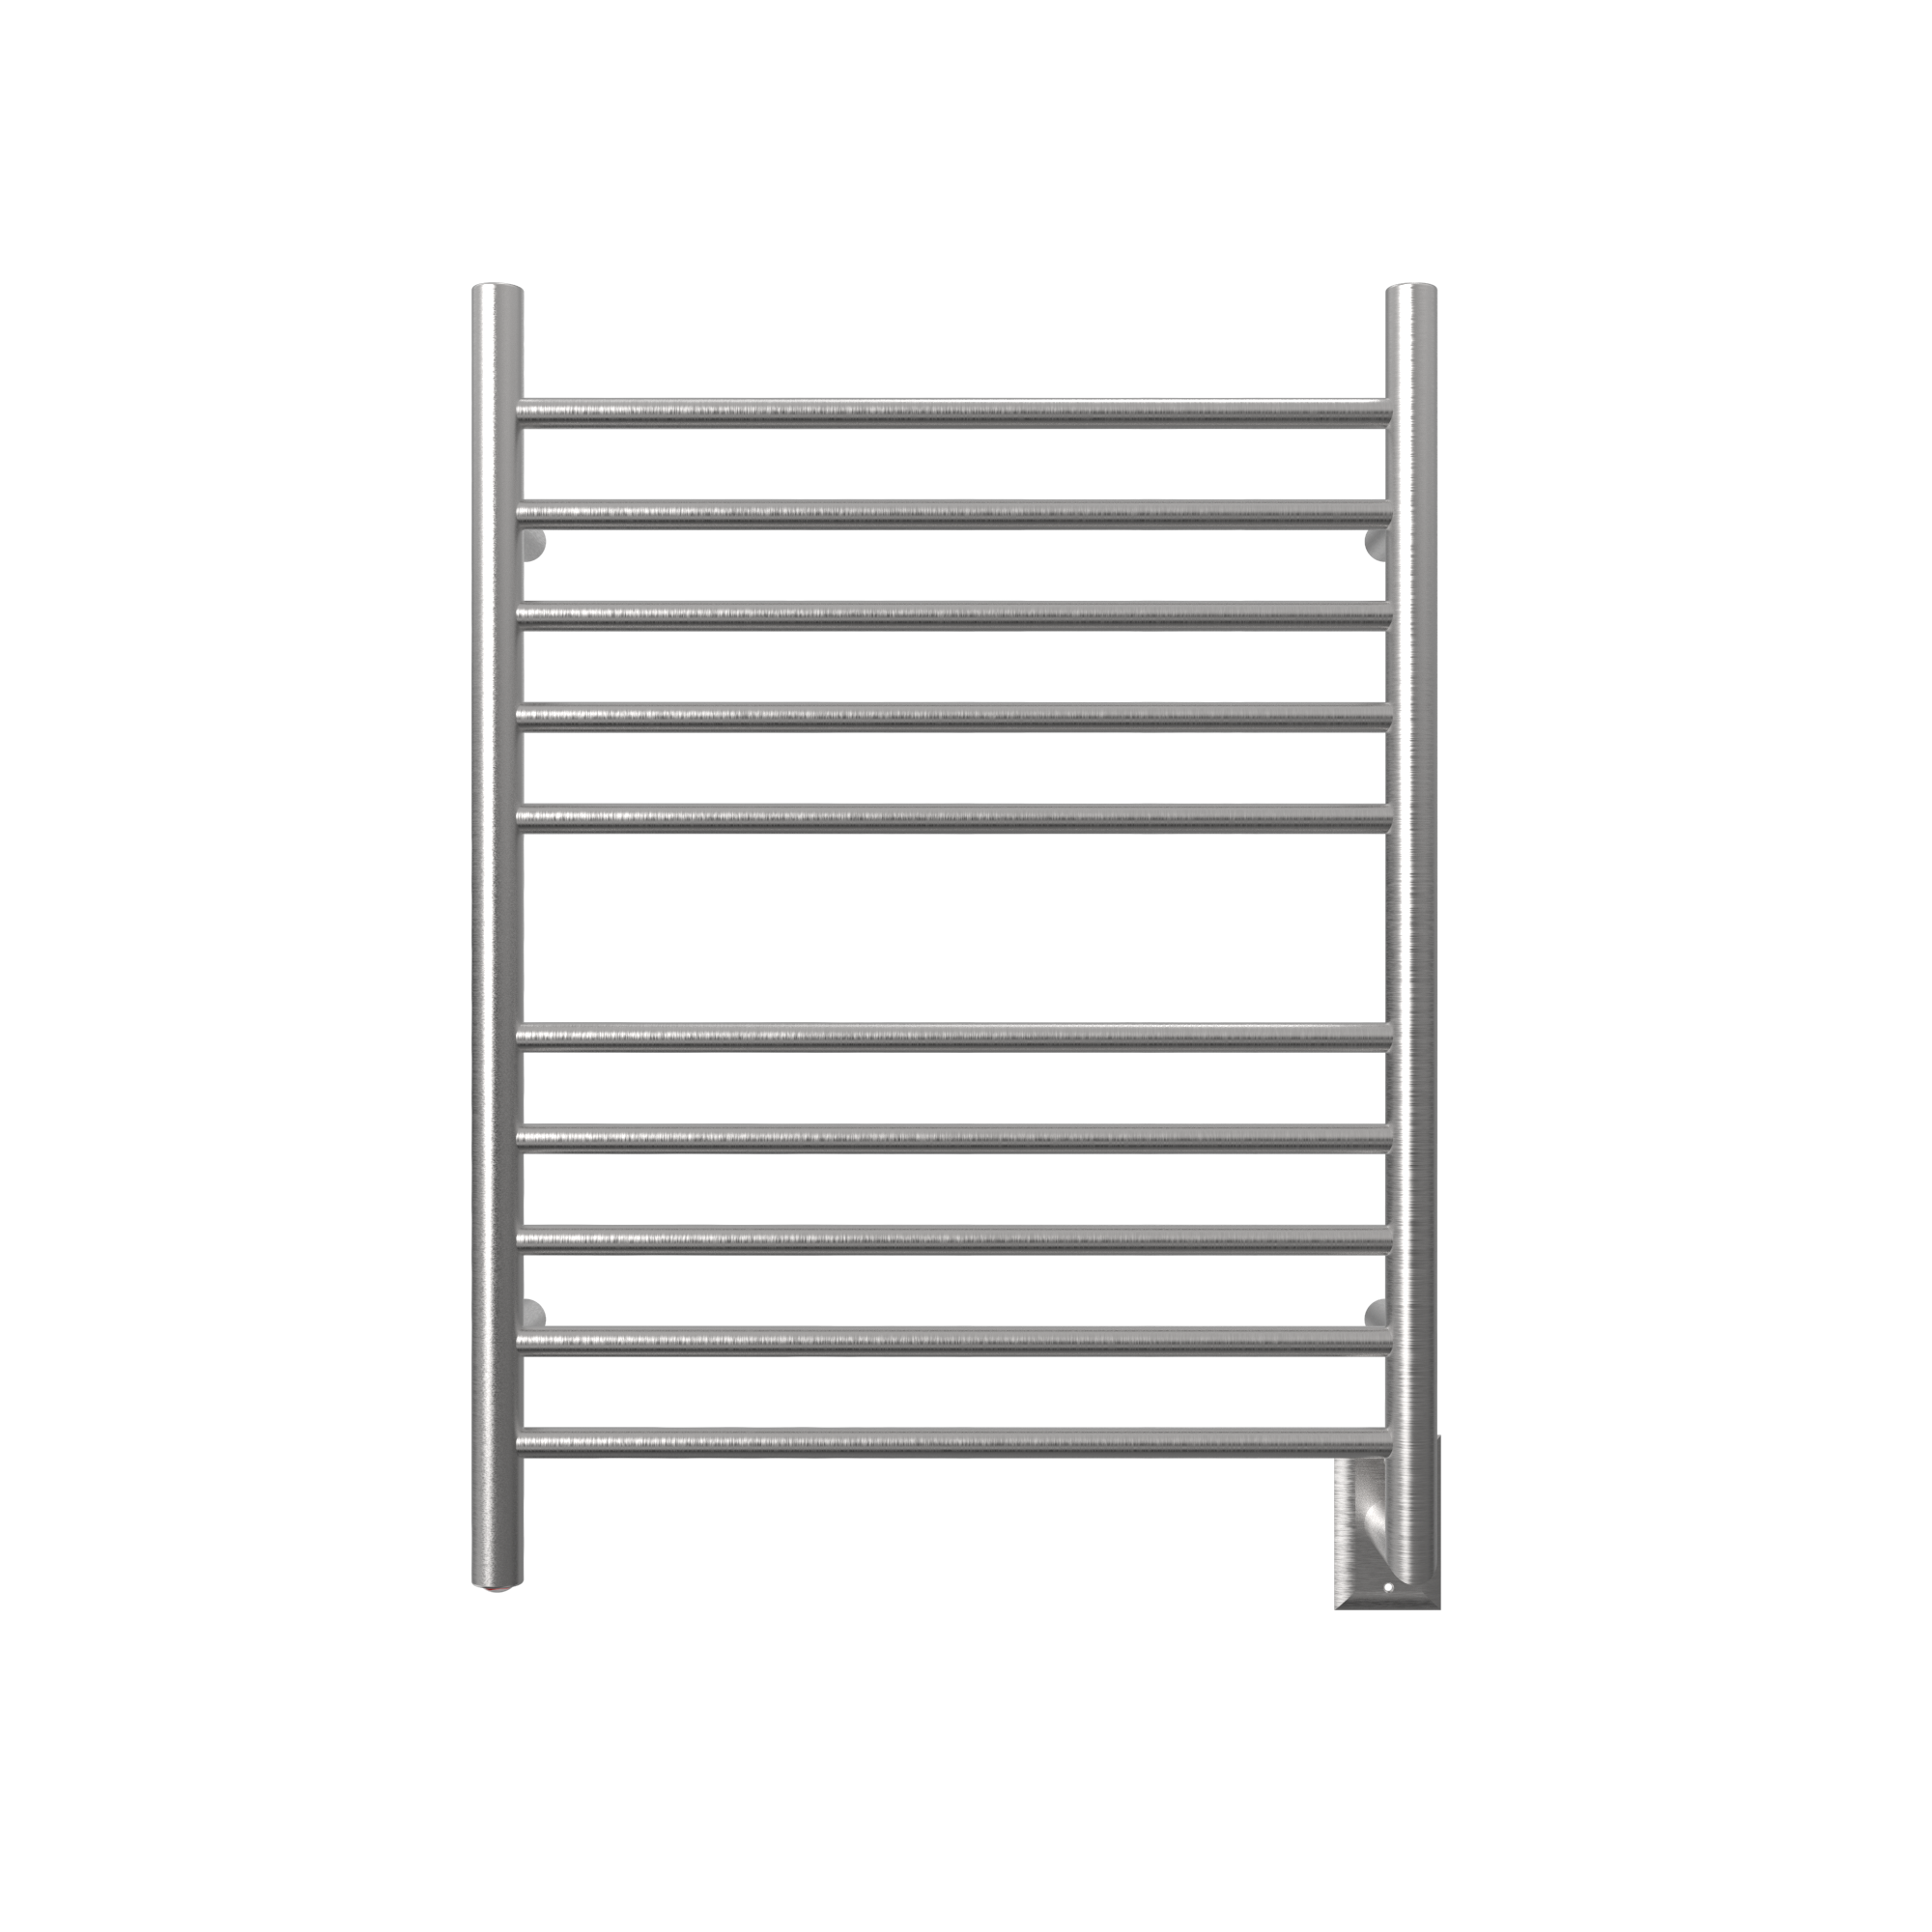 Towel Rack Rail Non-Heated Polished Stainless Steel Round Bar for Bathroom